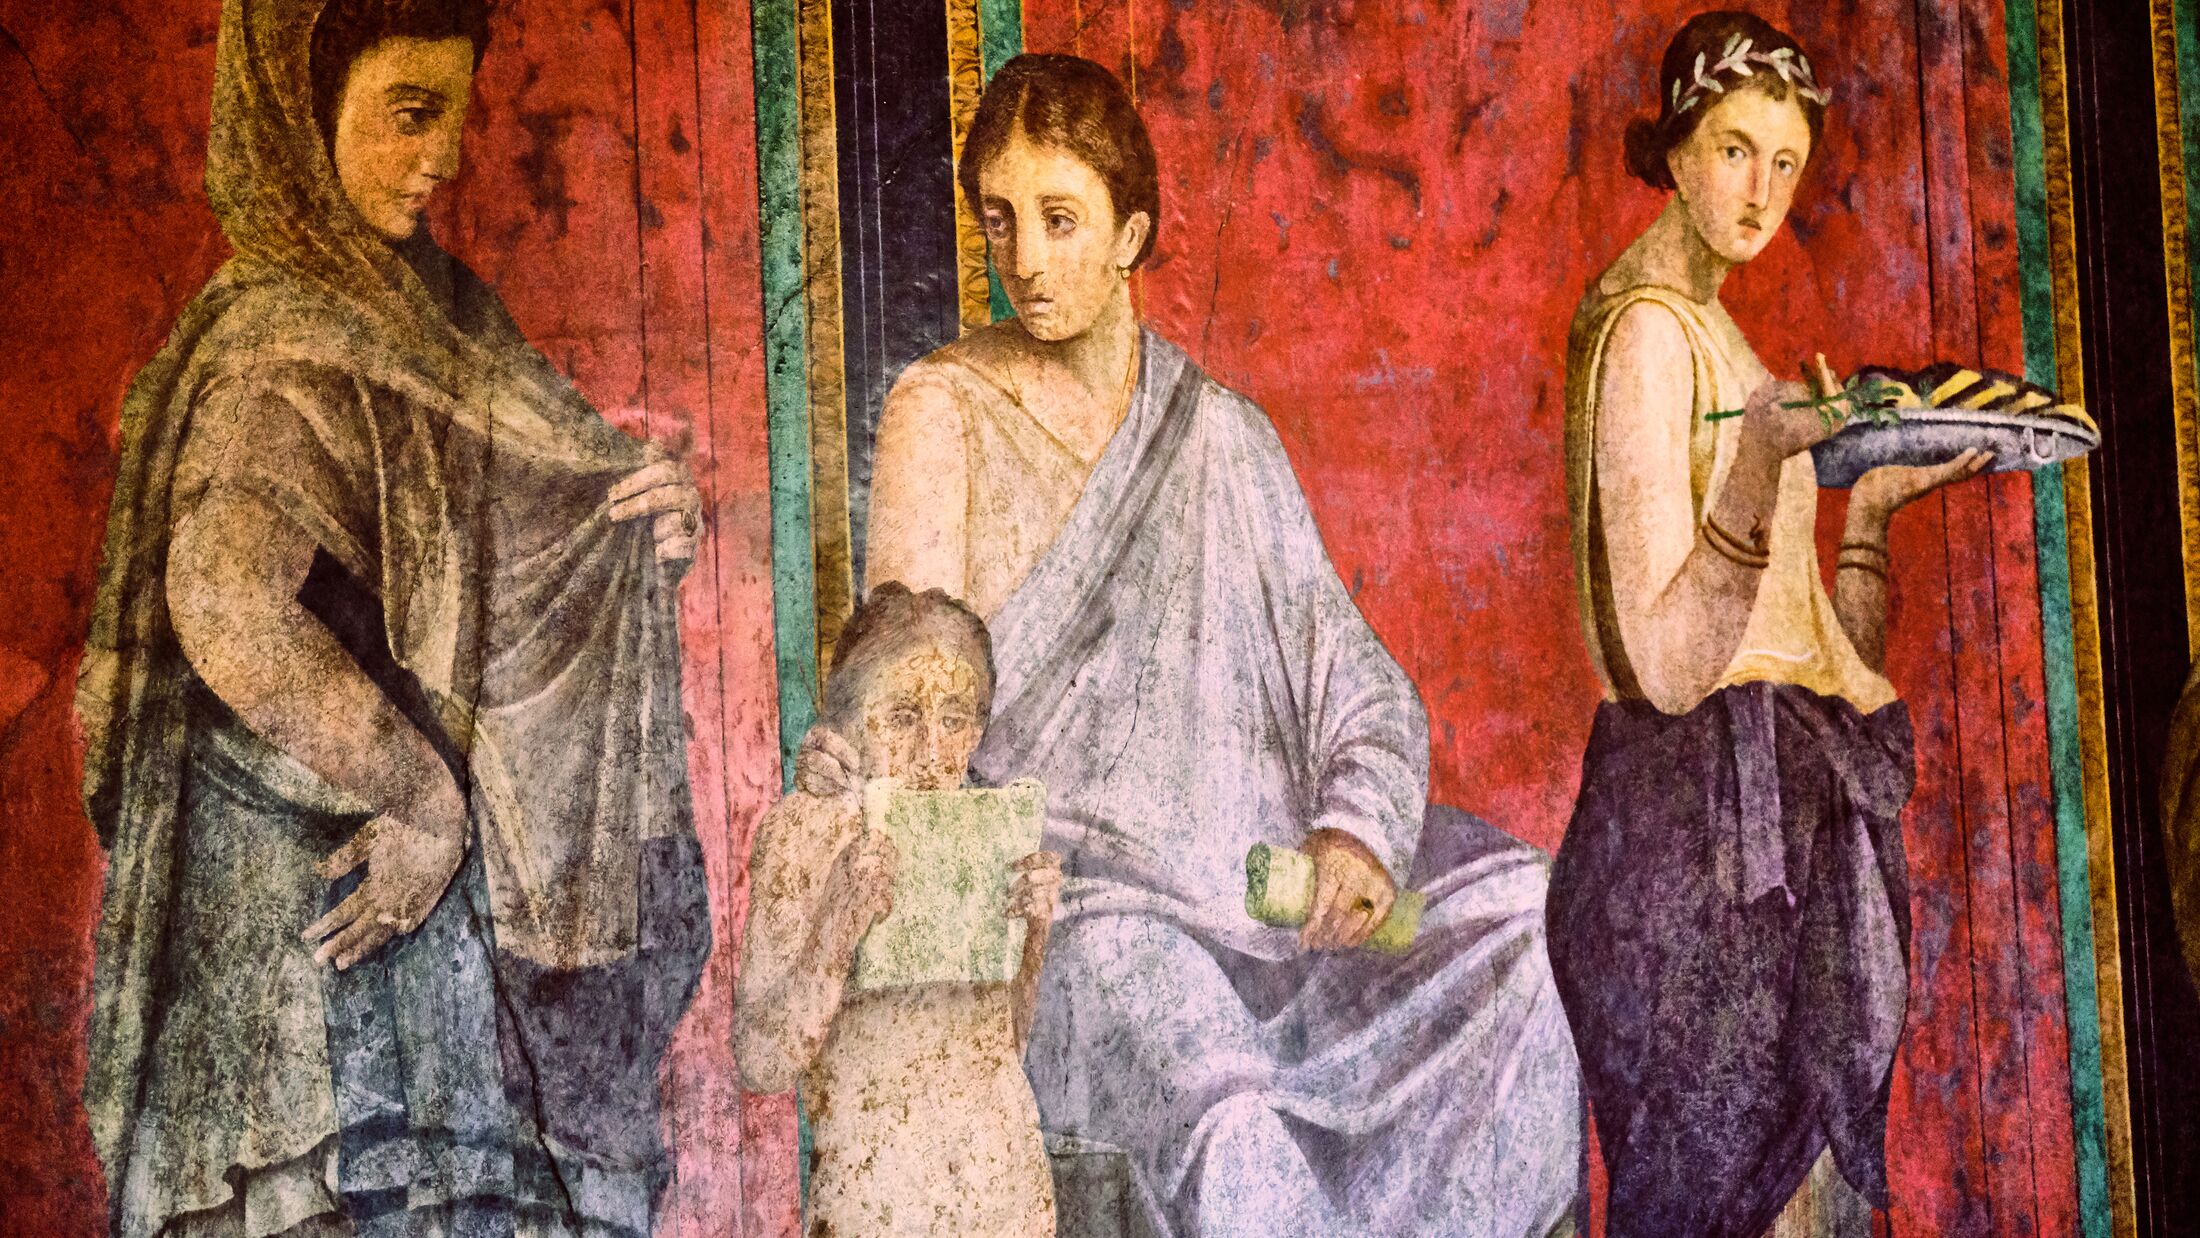 detail of the ancient painting in the Villa of the Mysteries in Pompeii.